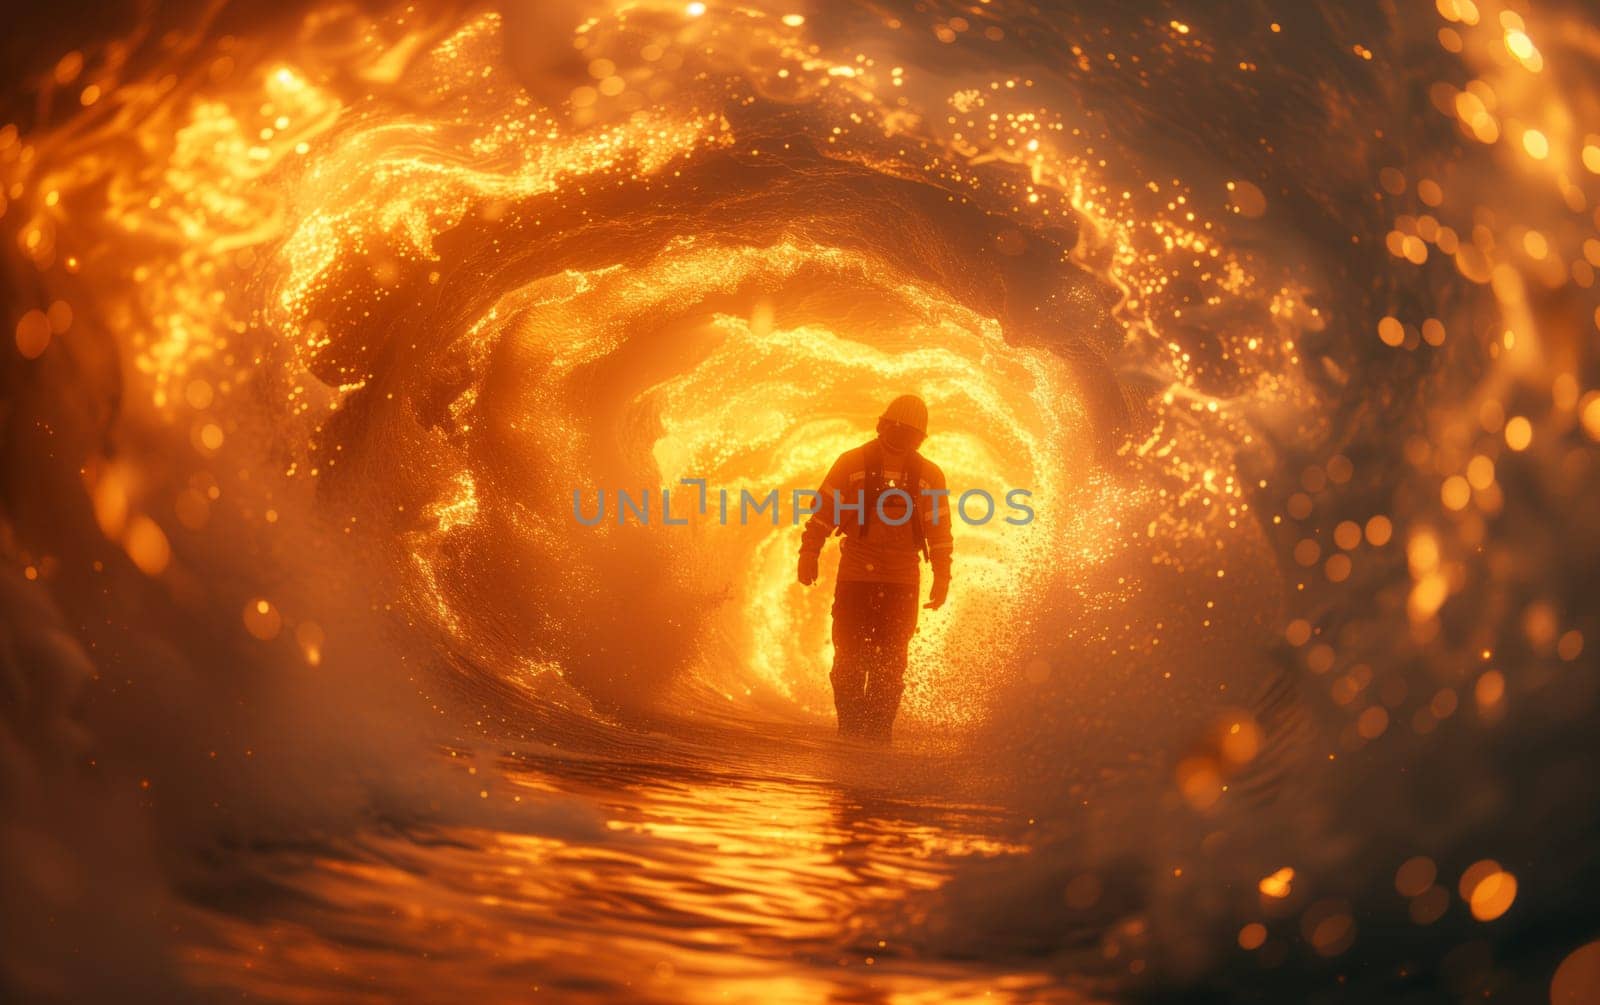 A man is navigating through a fiery tunnel, experiencing the intense heat and mesmerizing atmospheric phenomenon, resembling an artistic painting in a geological landscape setting